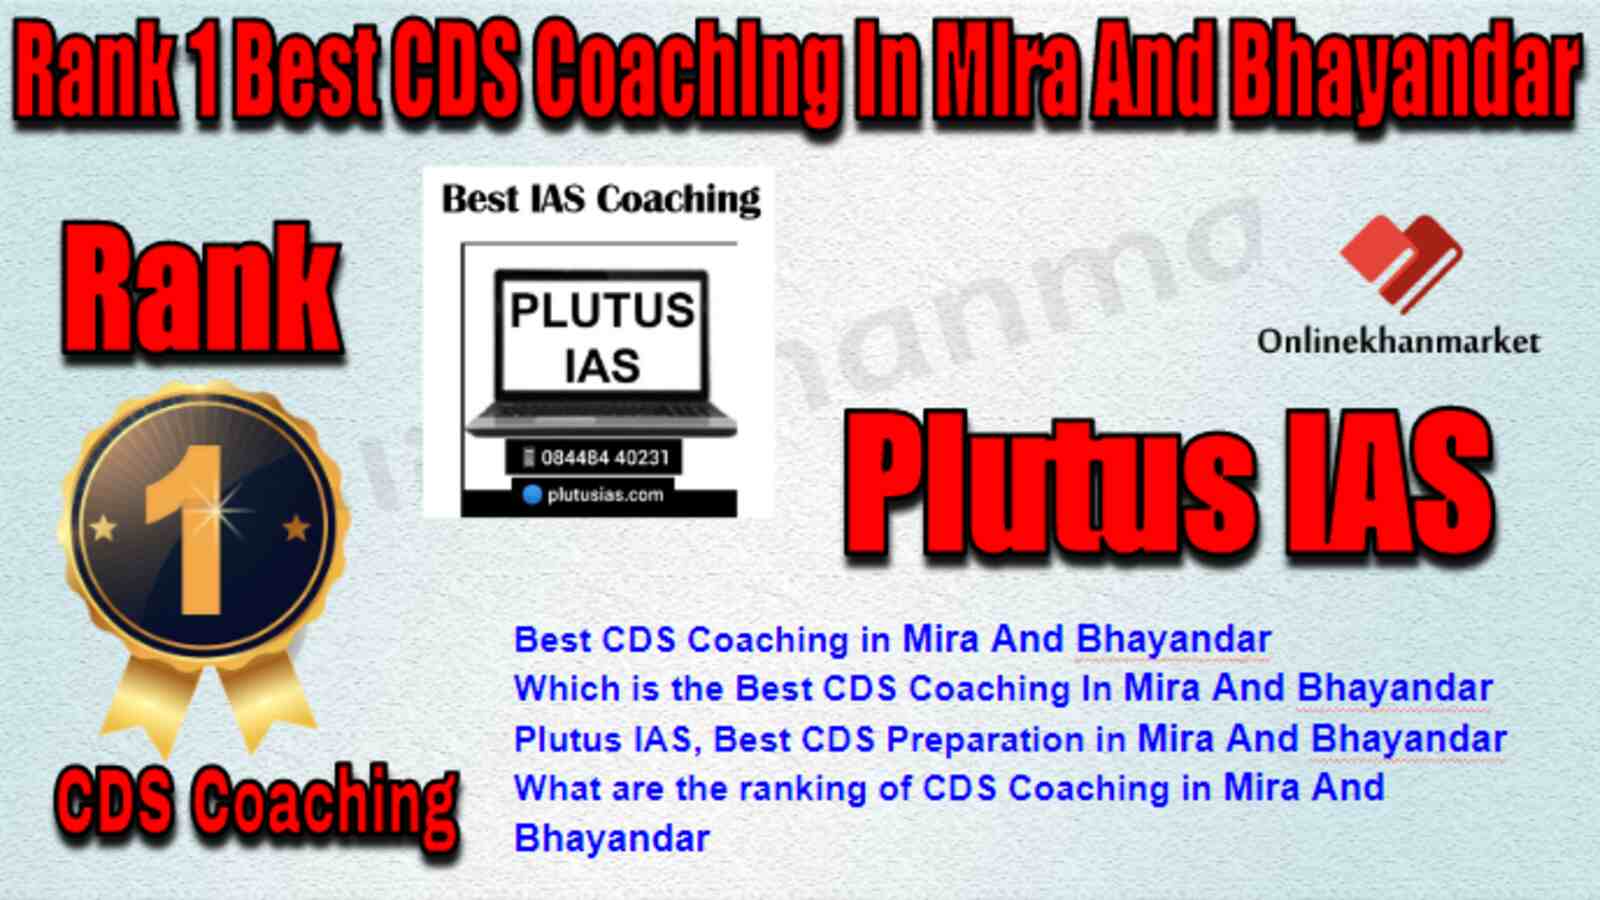 Rank 1 Best CDS Coaching in Mira and Bhayandar